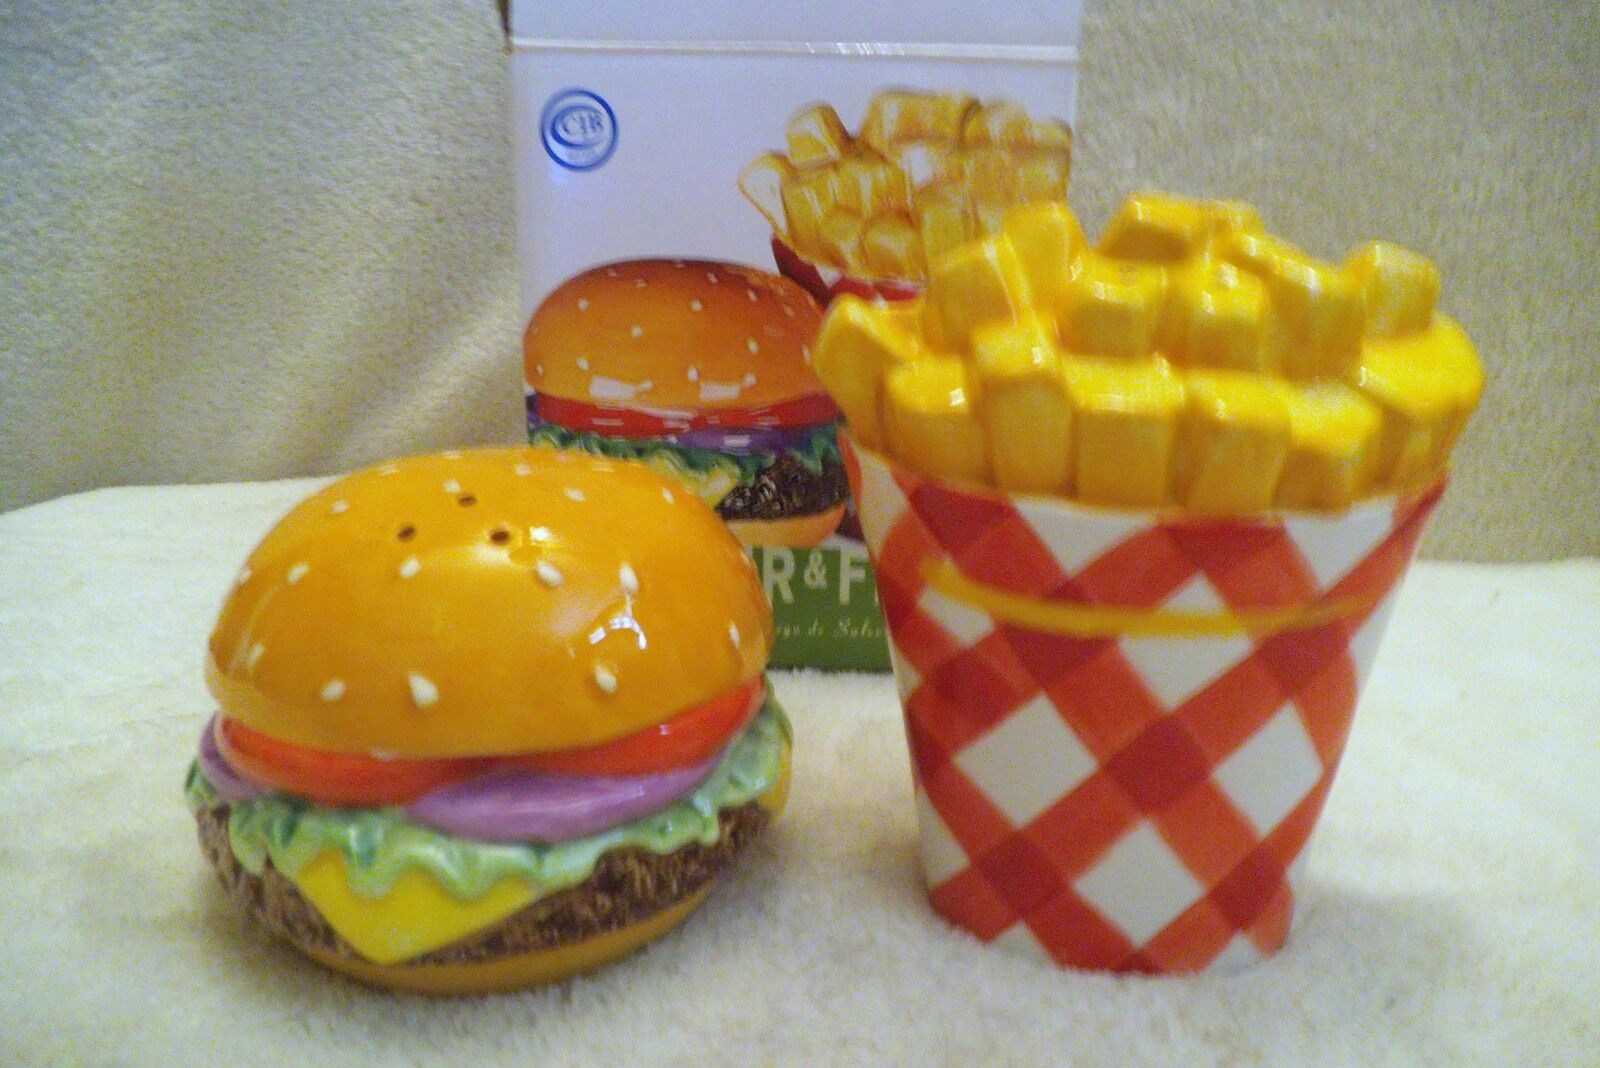 CHEEZE BURGER & FRIES - SALT & PEPPER SHAKERS - BY CLAY ART - NEW IN BOX 